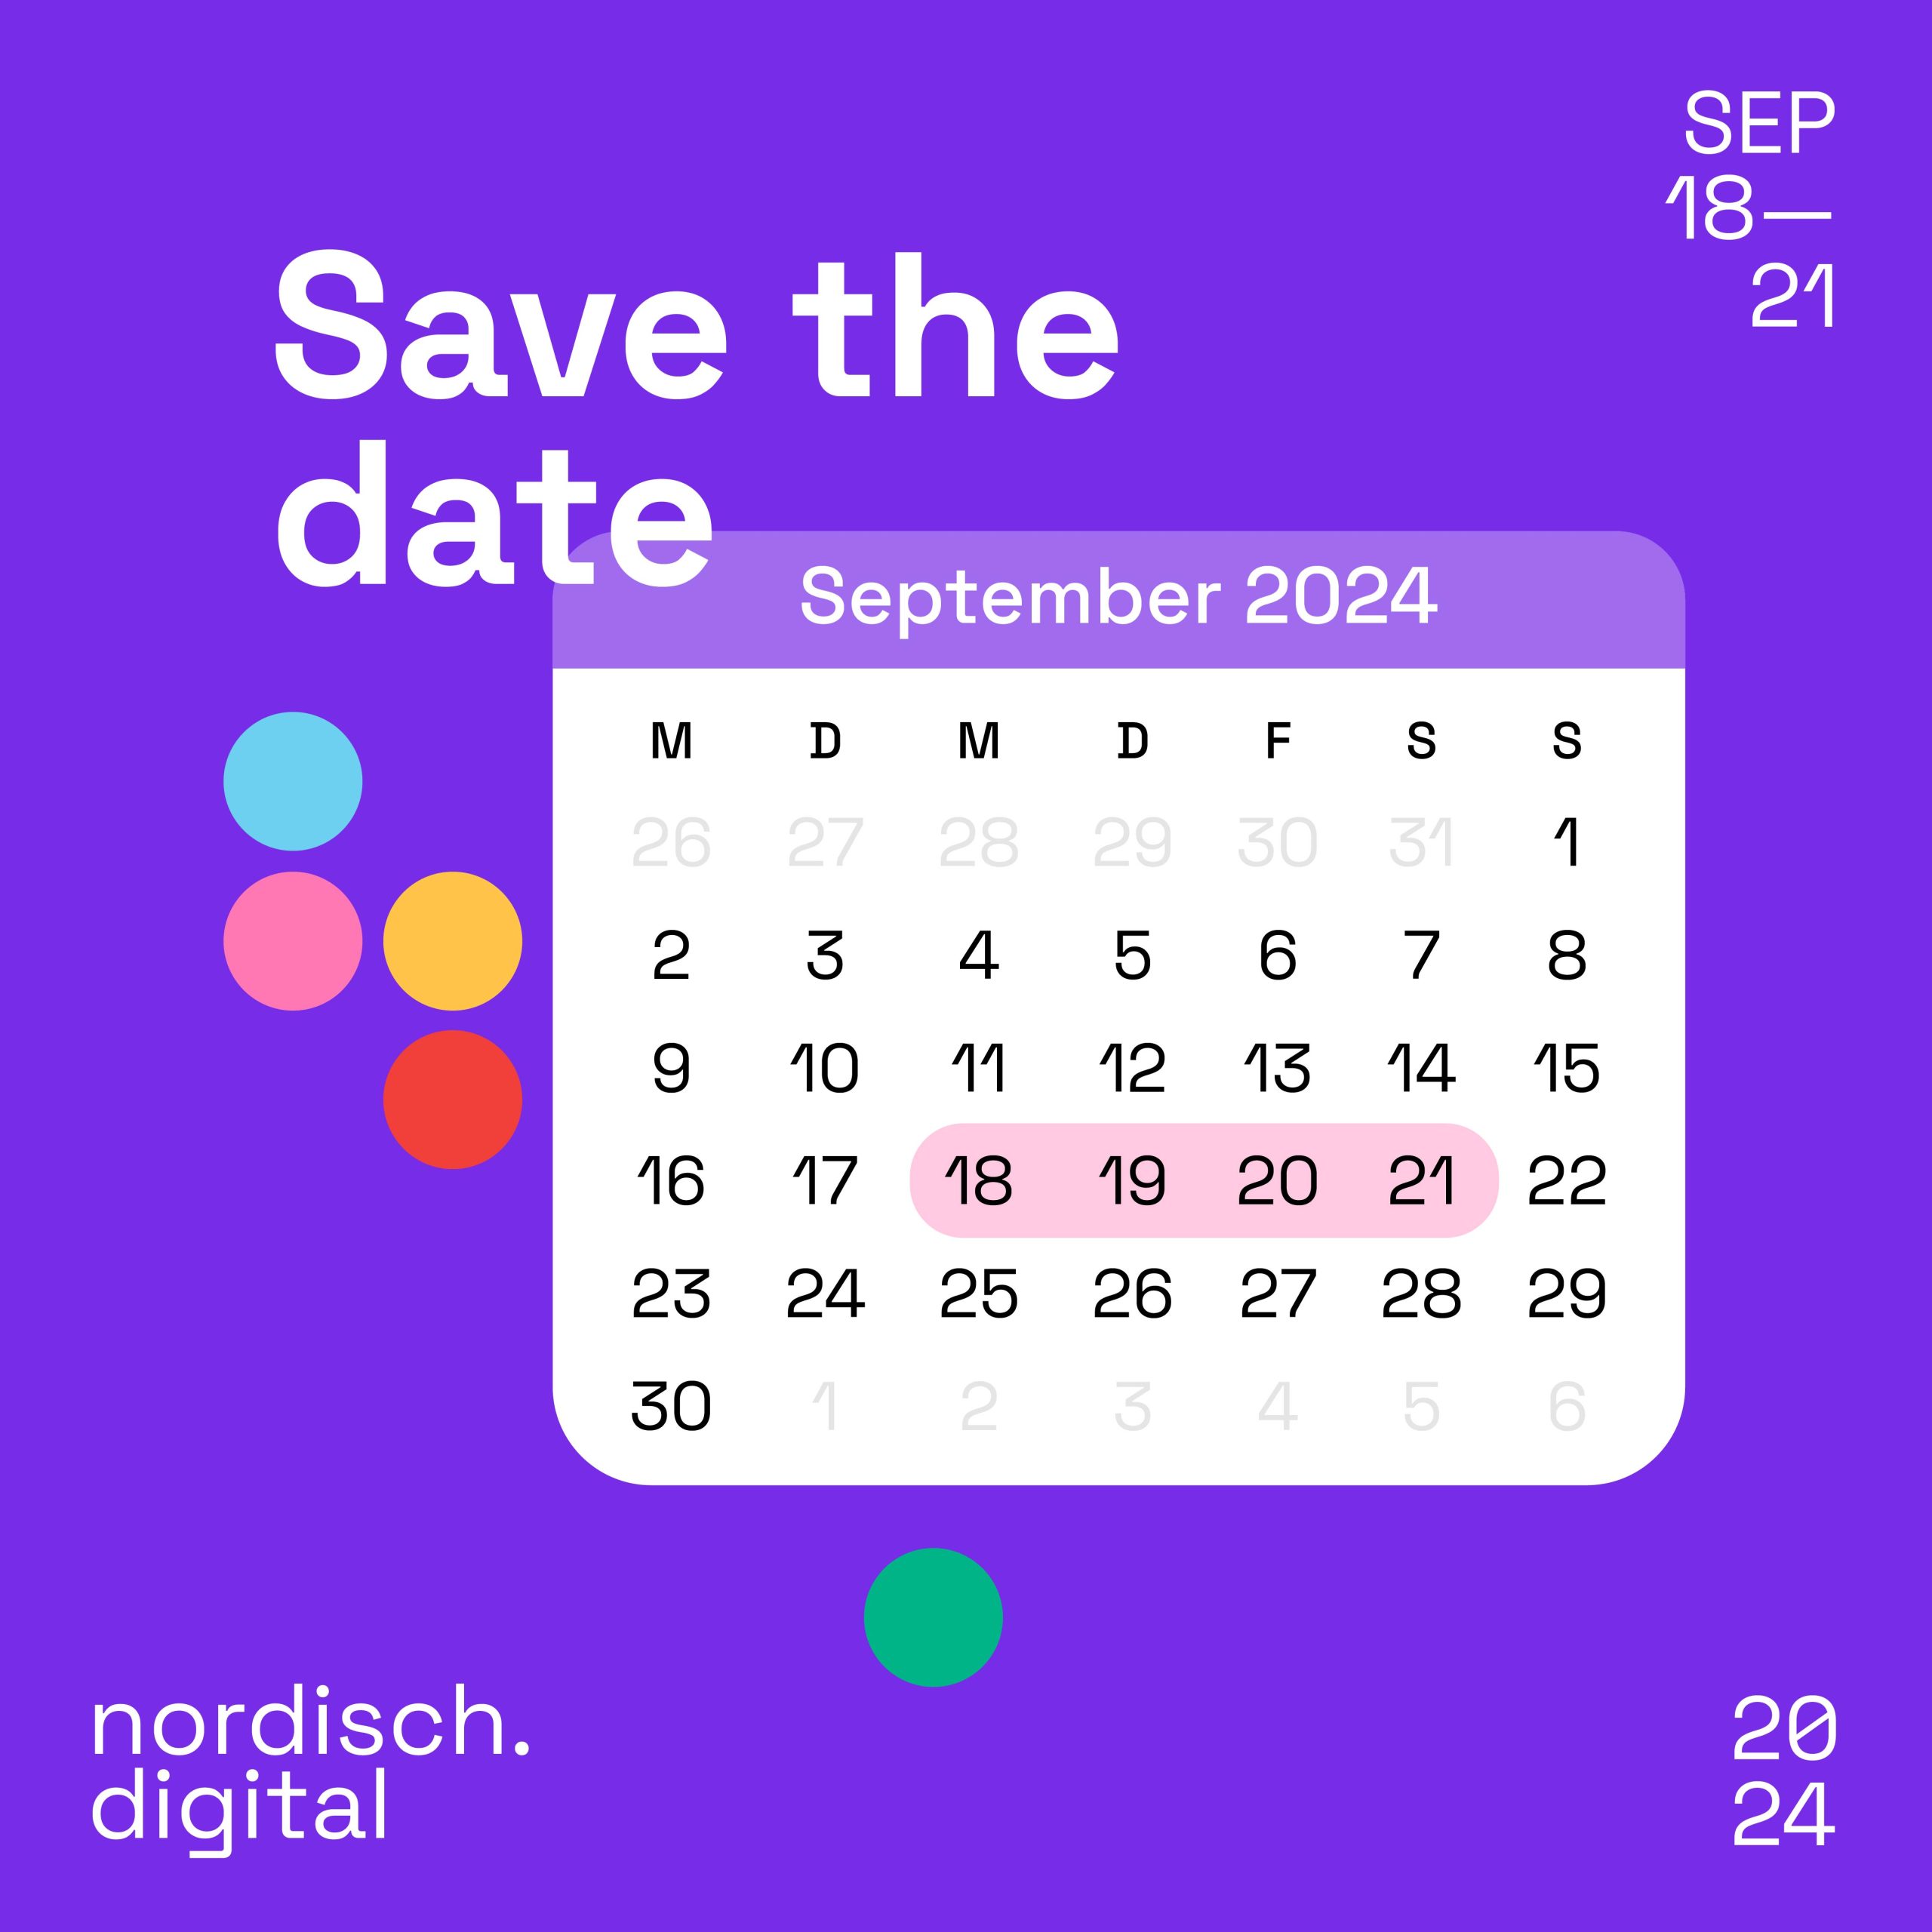 Save the date_nd24_300ppi